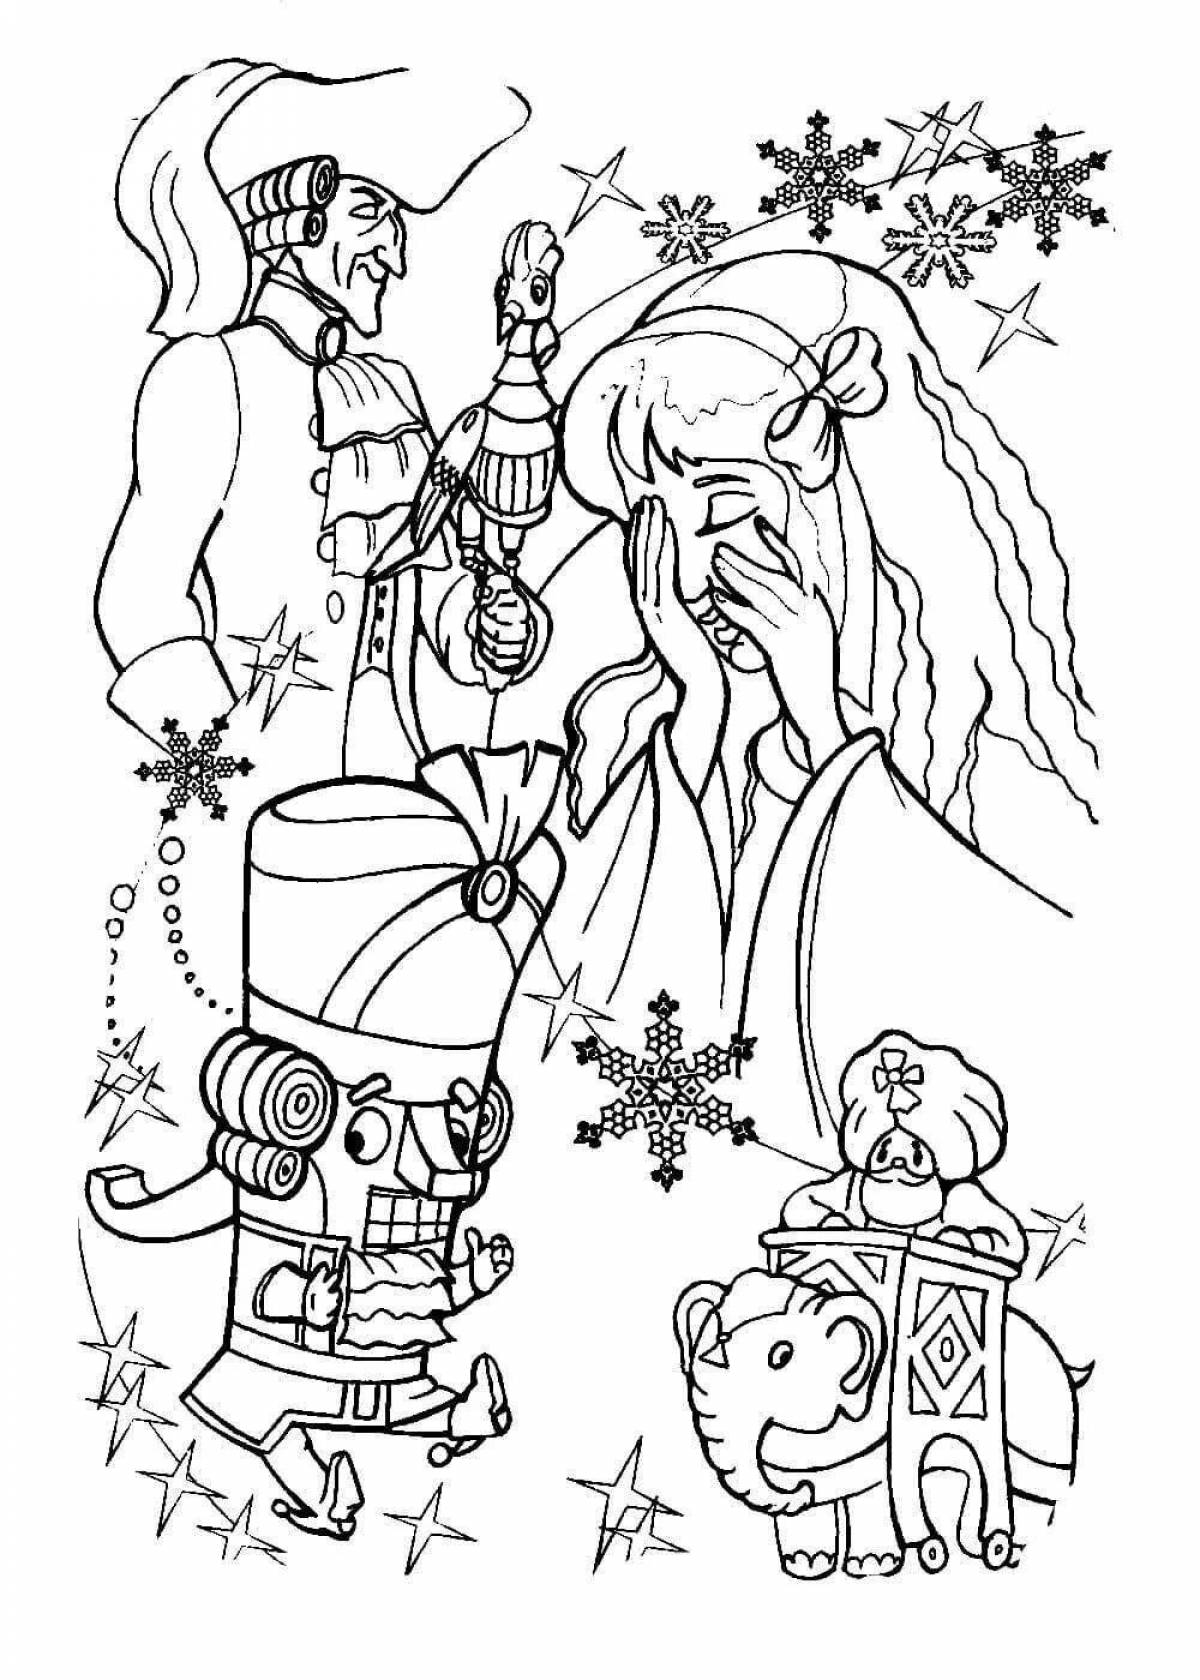 Colored nutcracker and mouse king coloring book